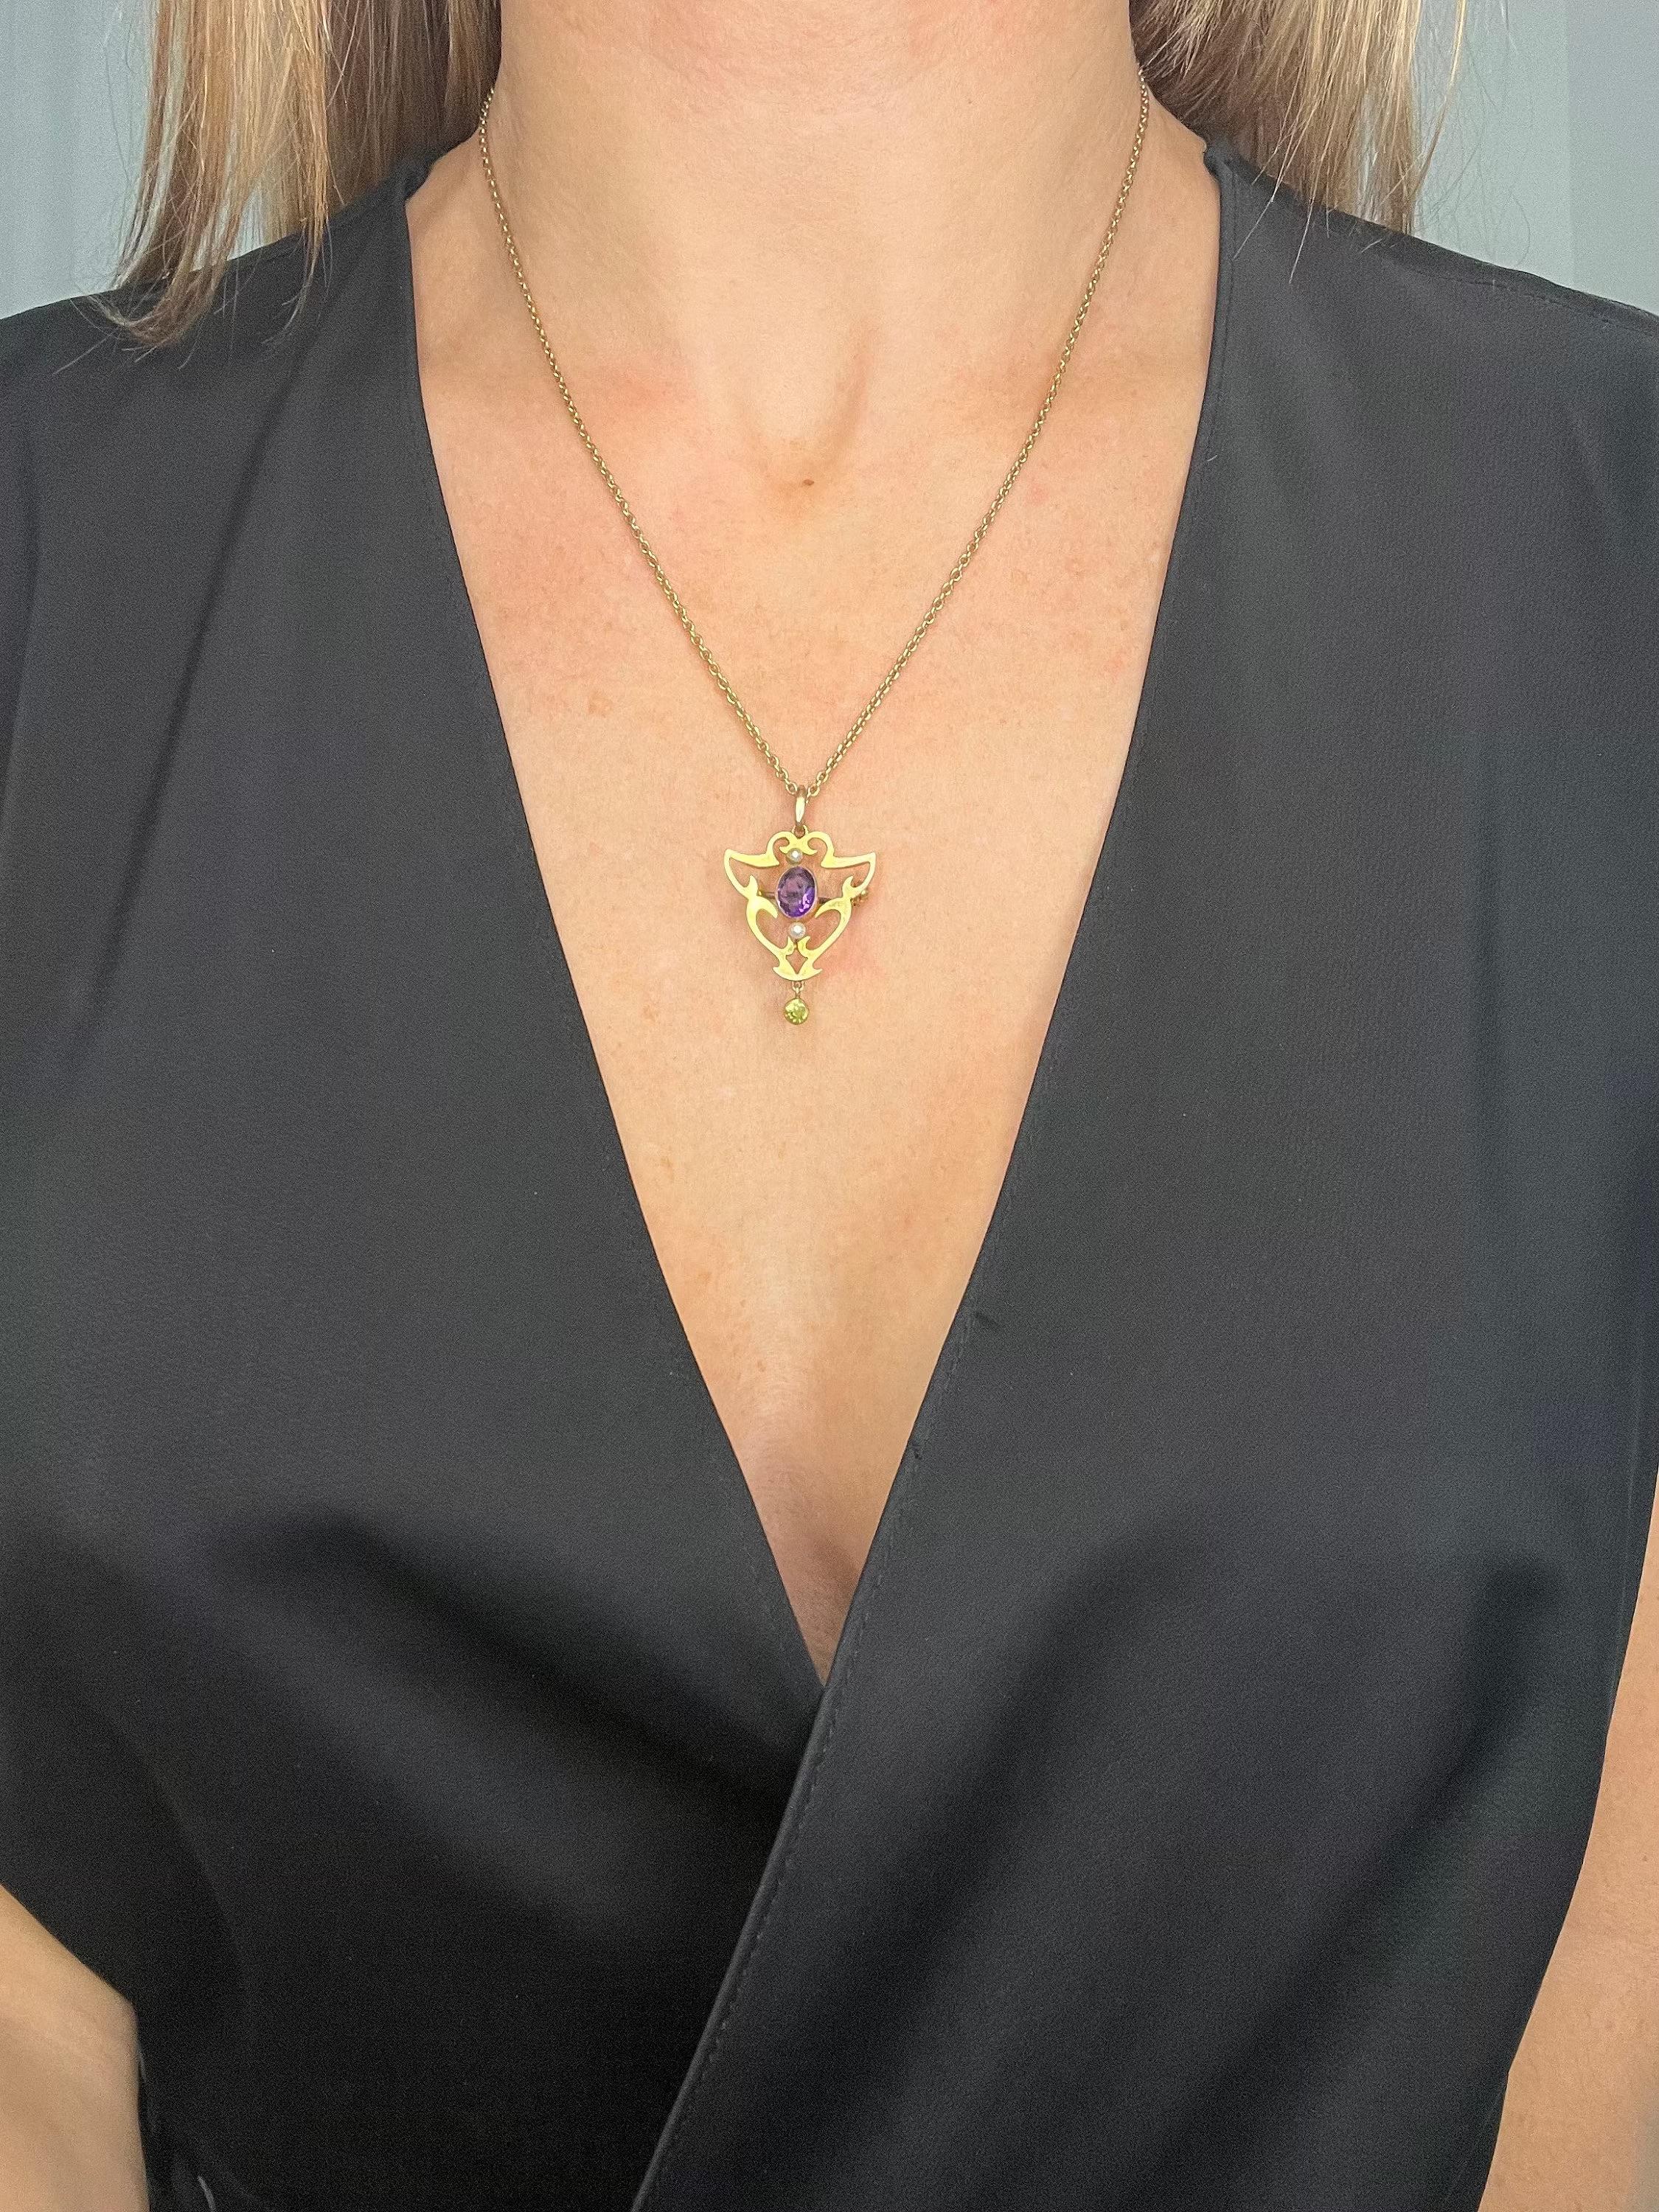 Antique Suffragette Pendant/Brooch 

9ct Gold Tested

Circa 1910 

This 9ct yellow gold suffragette pendant is a stunning piece of jewellery that is sure to turn heads. The pendant features an oval amethyst in the centre and features a natural seed